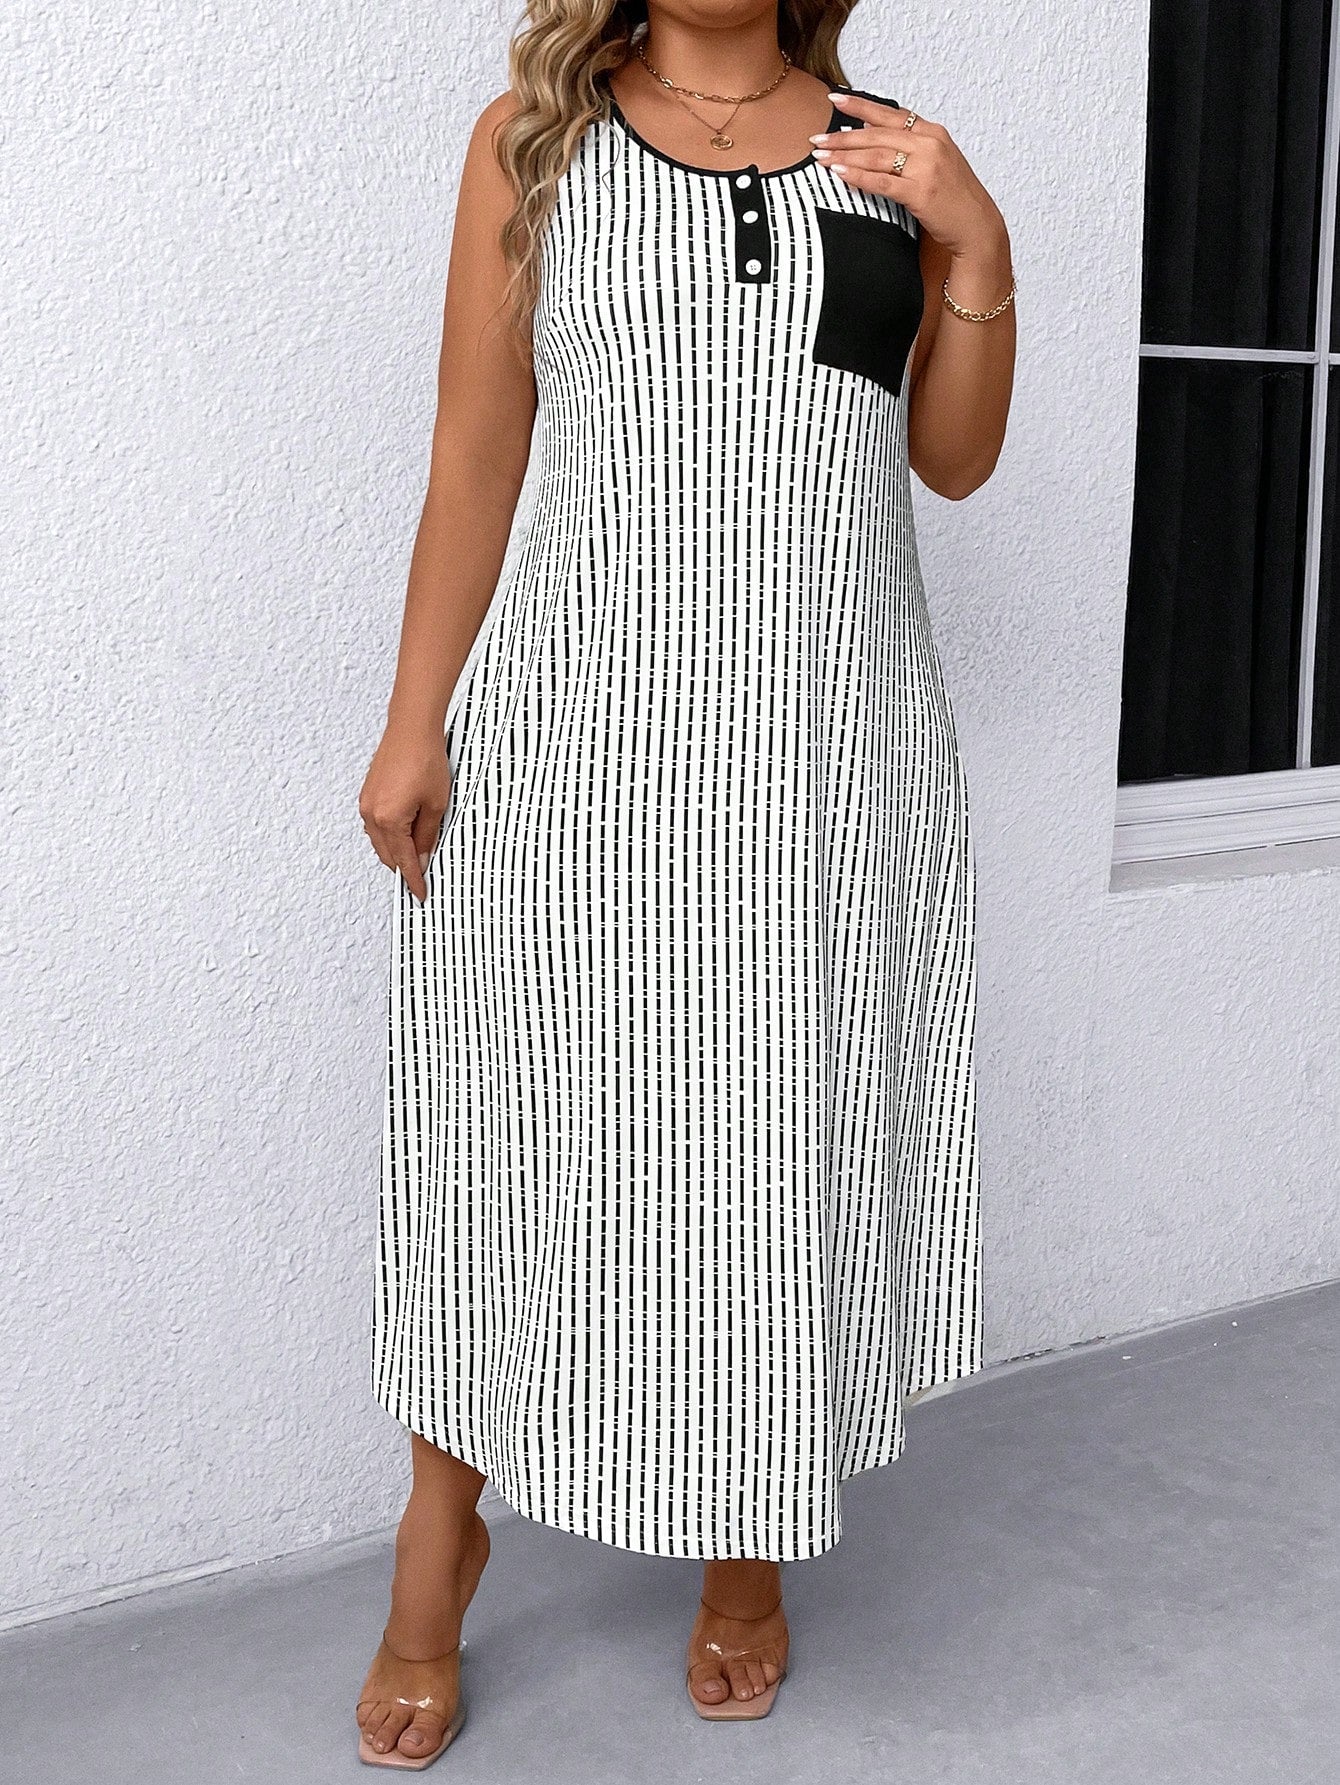 Plus Size Women's Summer Striped Sleeveless Casual Maxi Dress With Half Button Placket